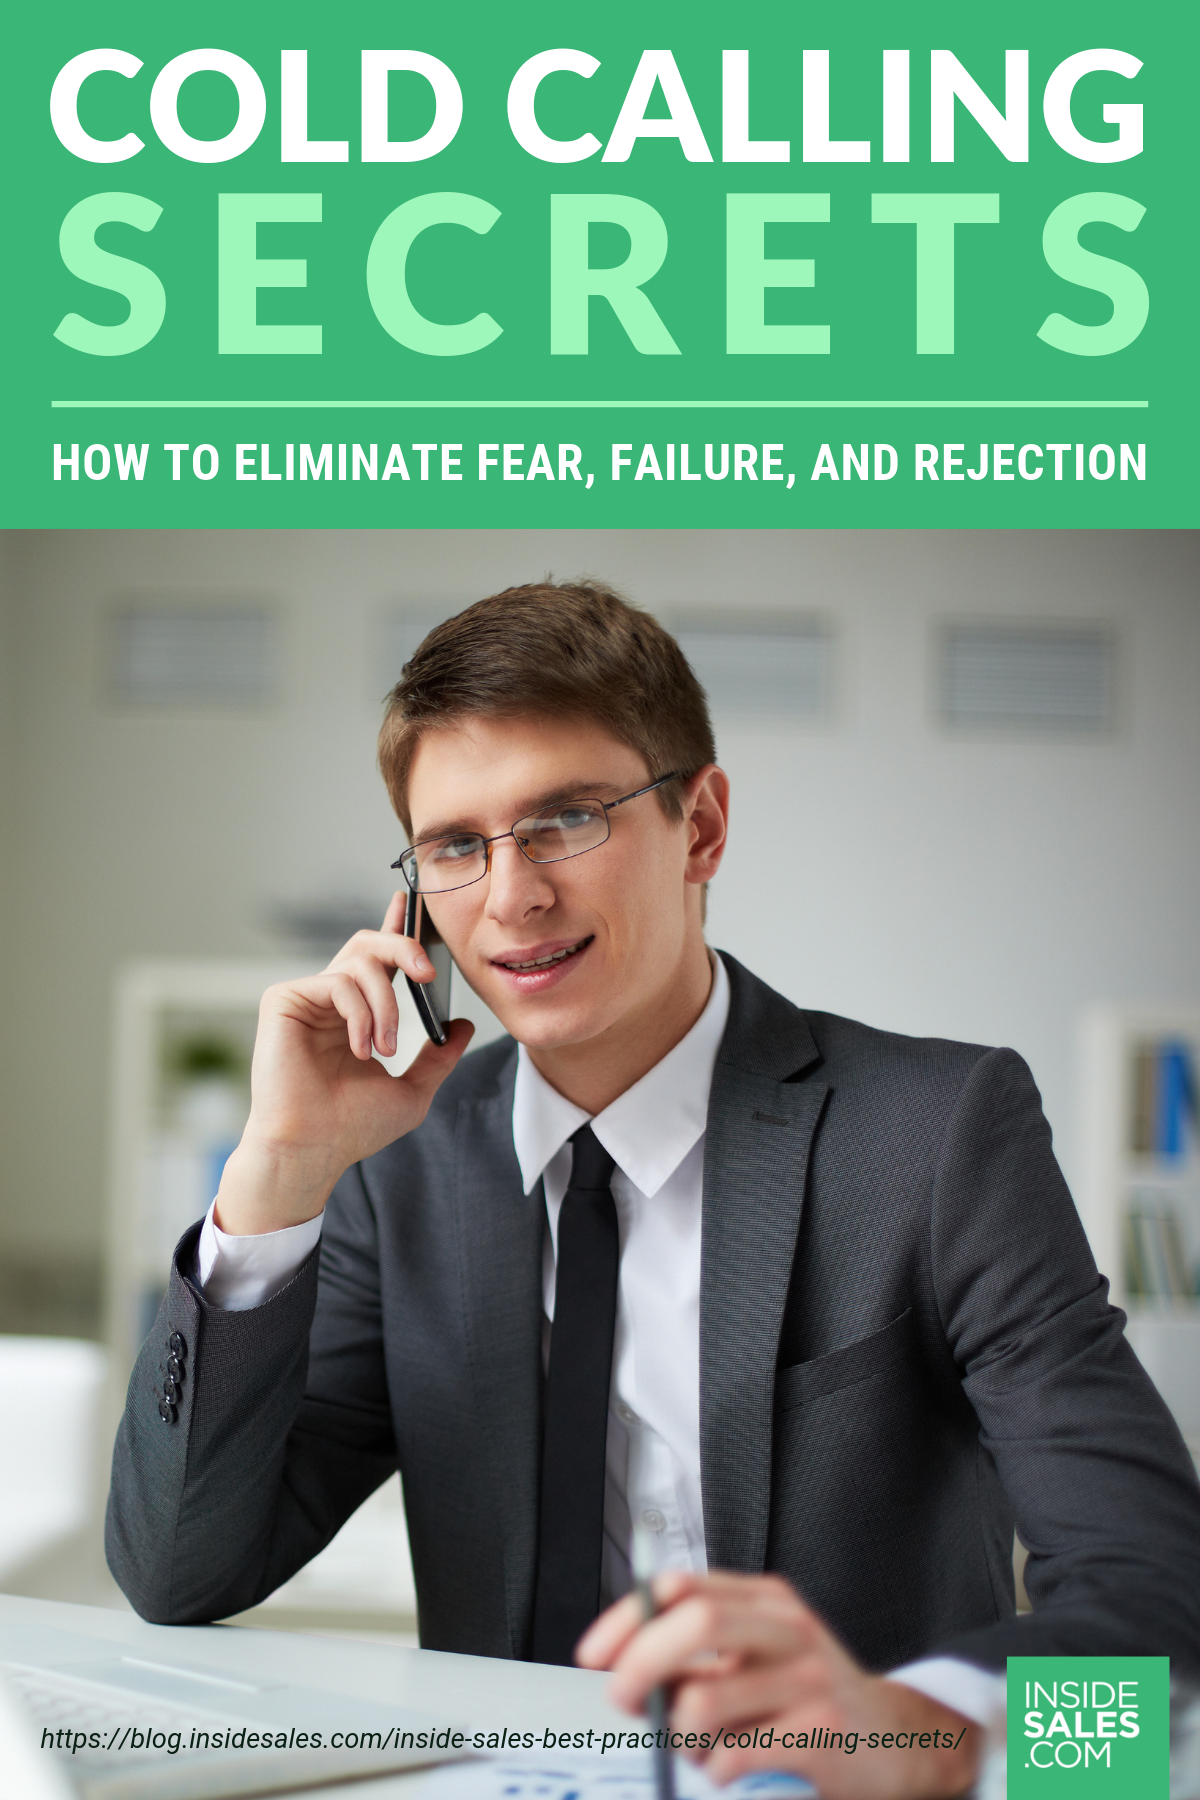 Cold Calling Secrets: How To Eliminate Fear, Failure, And Rejection https://www.insidesales.com/blog/inside-sales-best-practices/cold-calling-secrets/